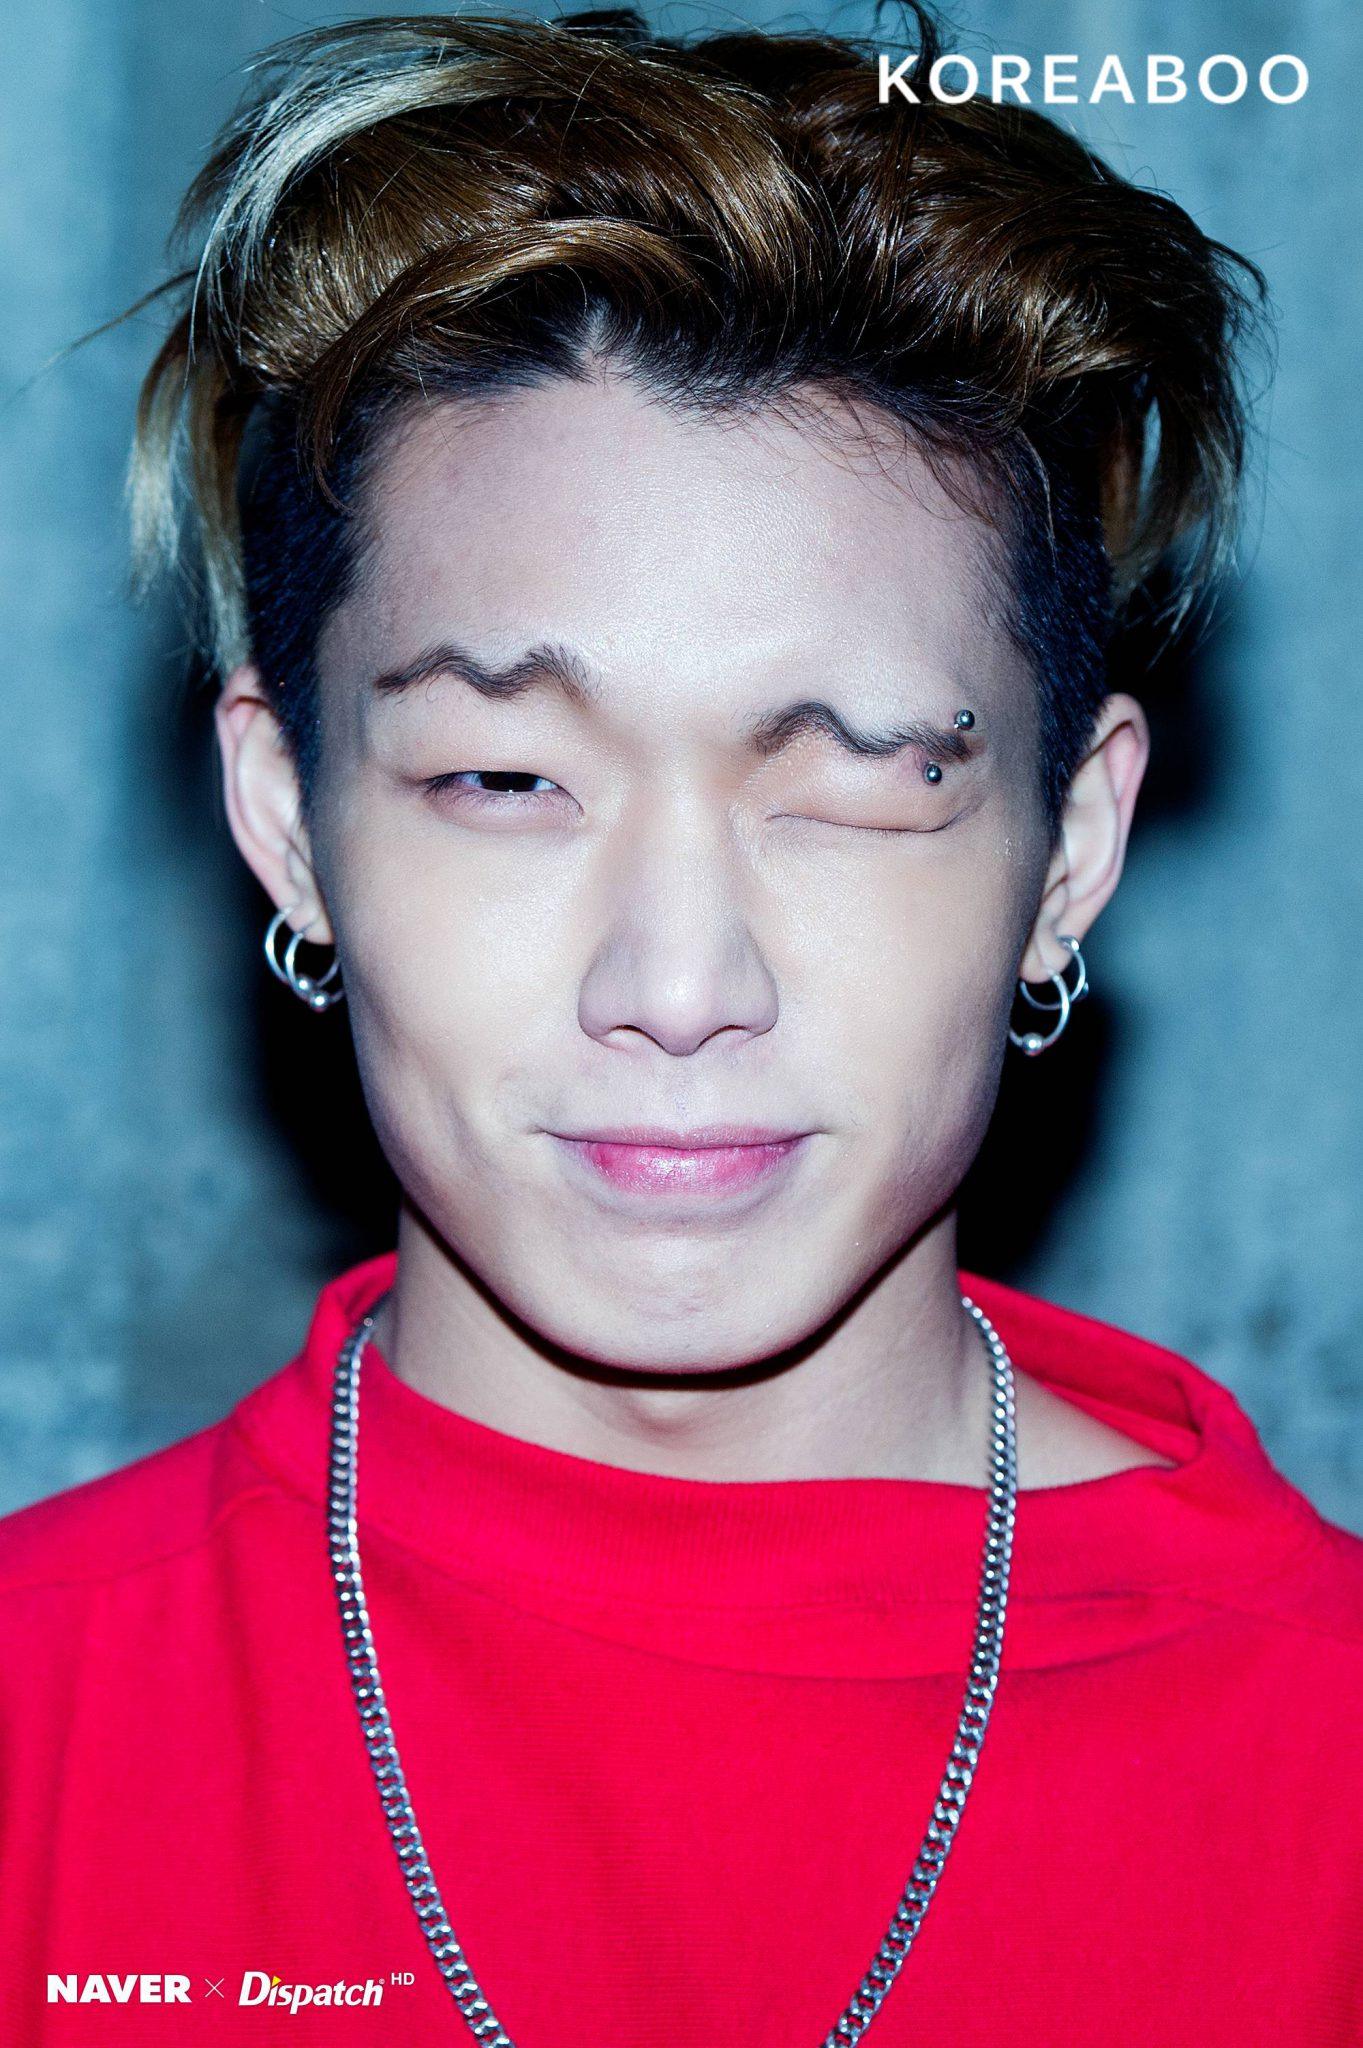 [★TRENDING] 10+ Photos Of Idols With Squiggly Eyebrows You Didn't Ask For - Koreaboo1363 x 2048